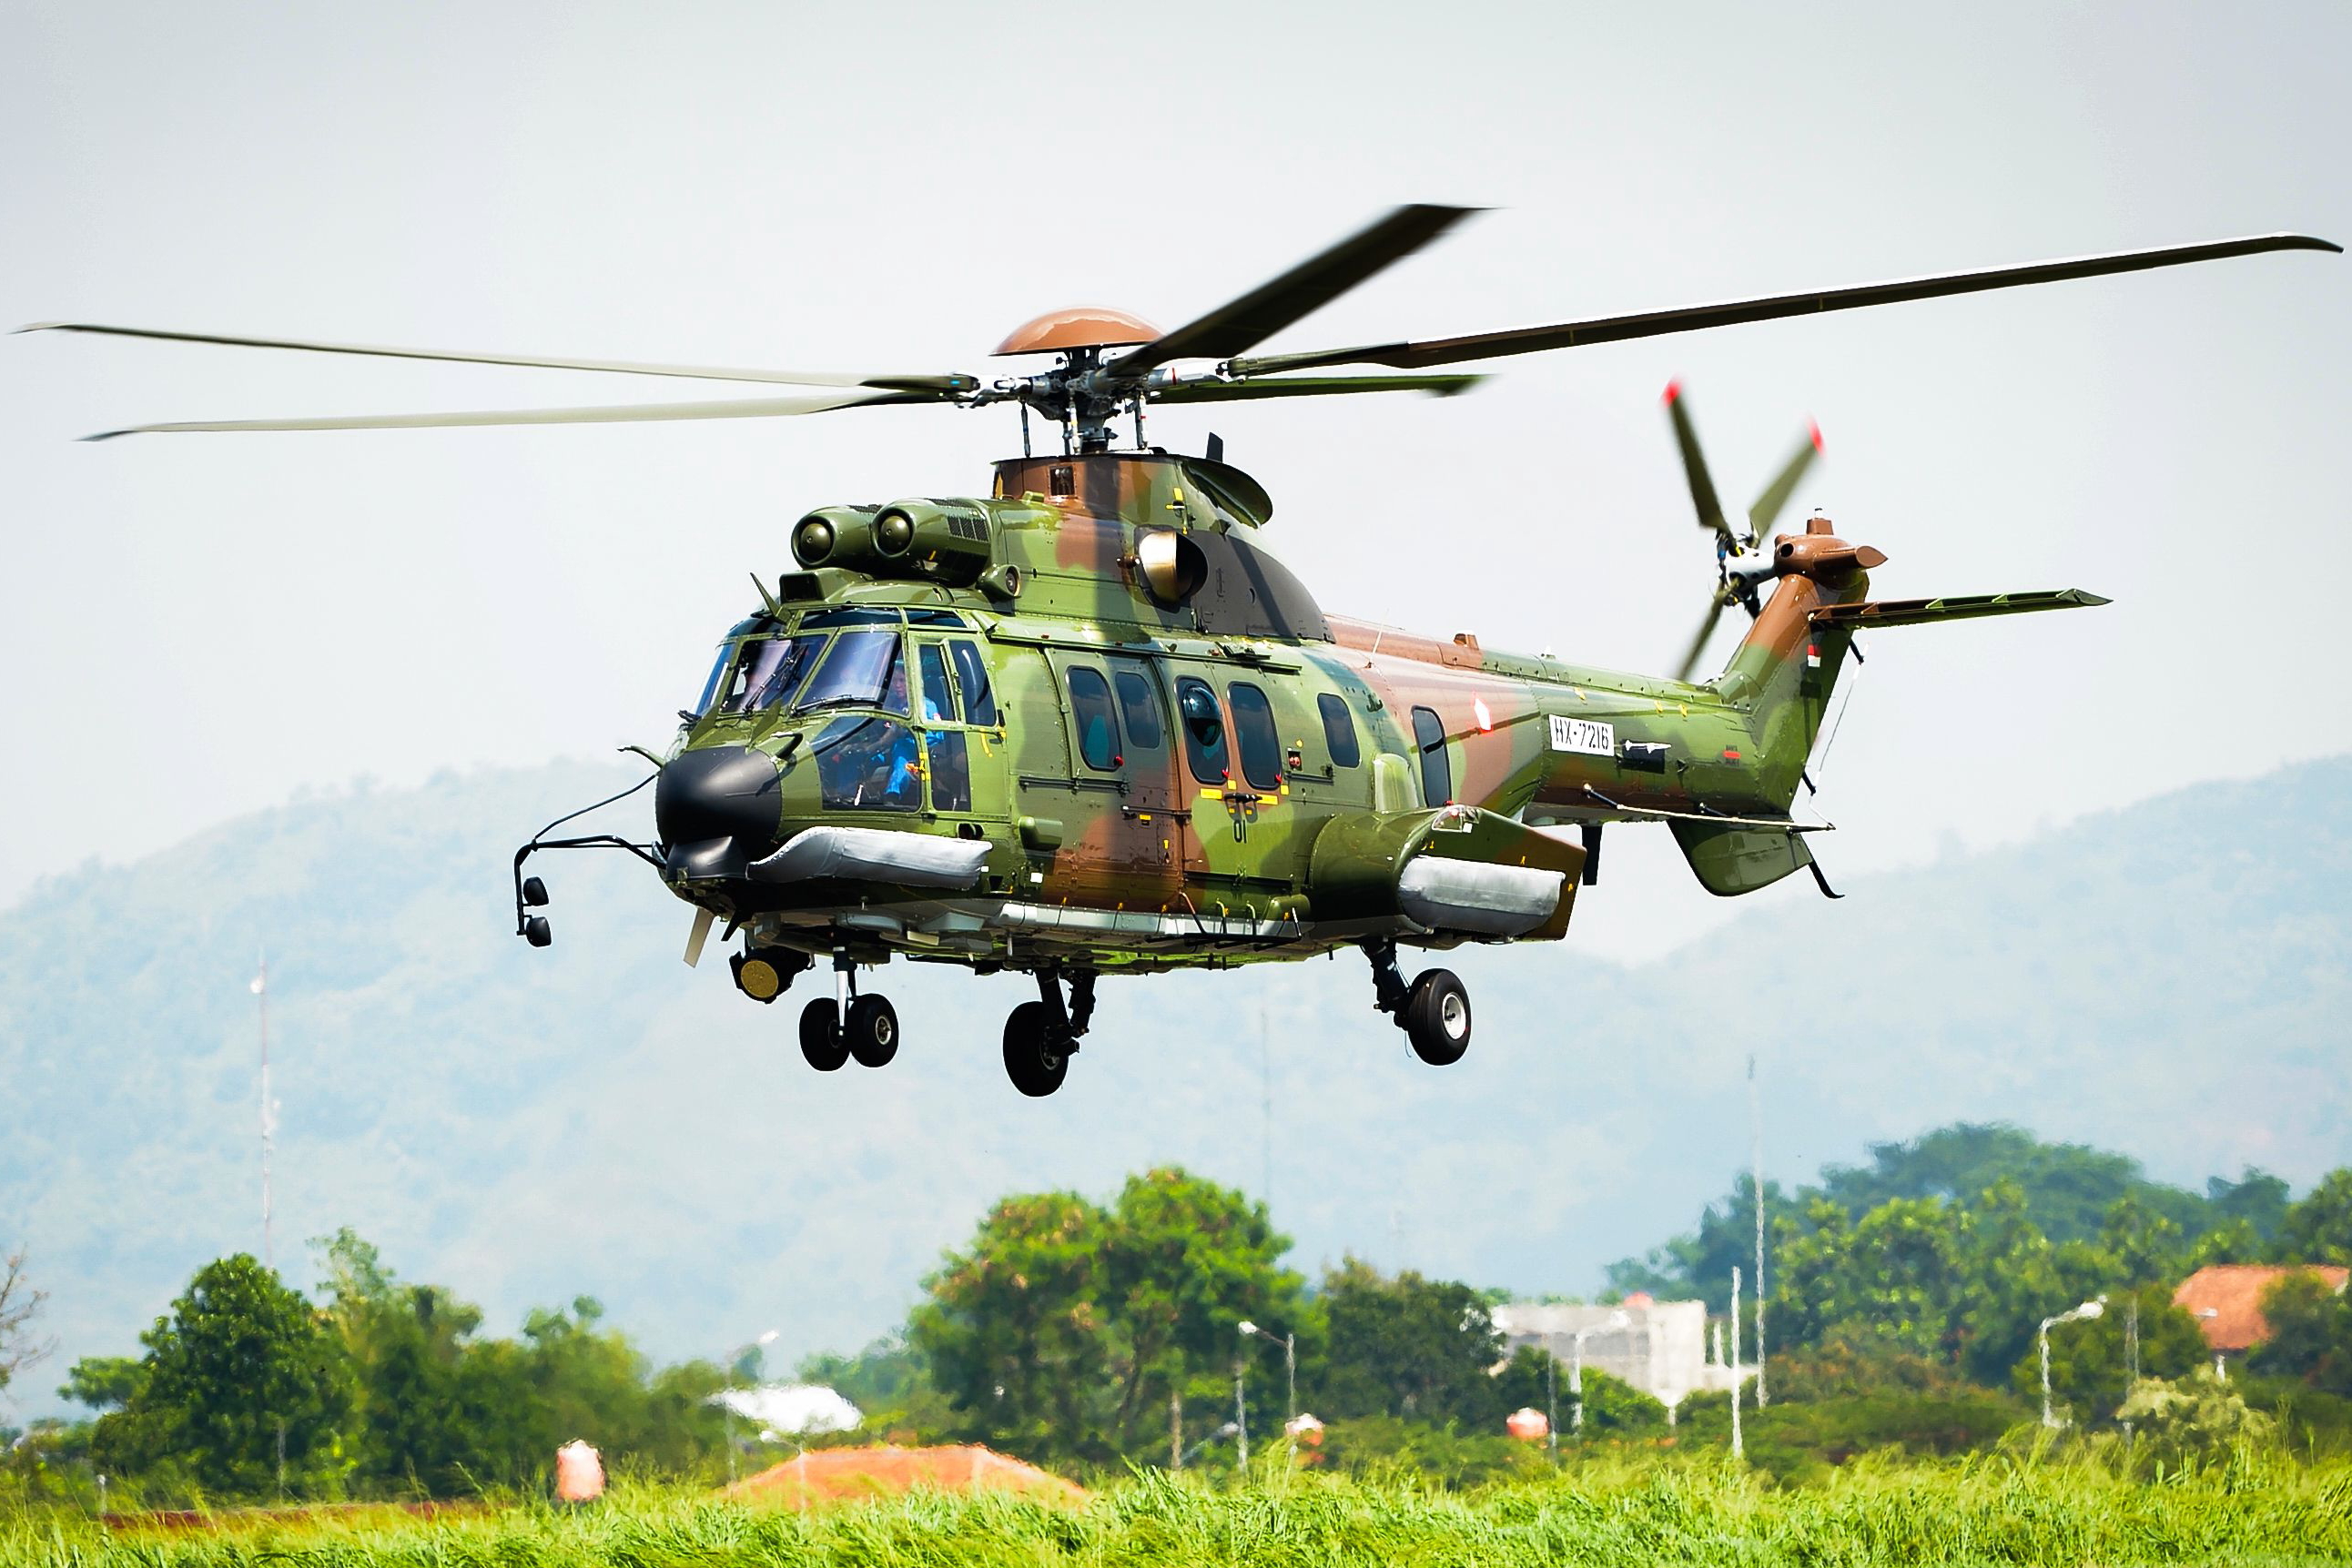 The Indonesian Air Force has ordered eight additional twin-engine multirole H225M helicopters as part of the country’s fleet-strengthening initiative for a combat search and rescue-capable fleet. Click to enlarge.